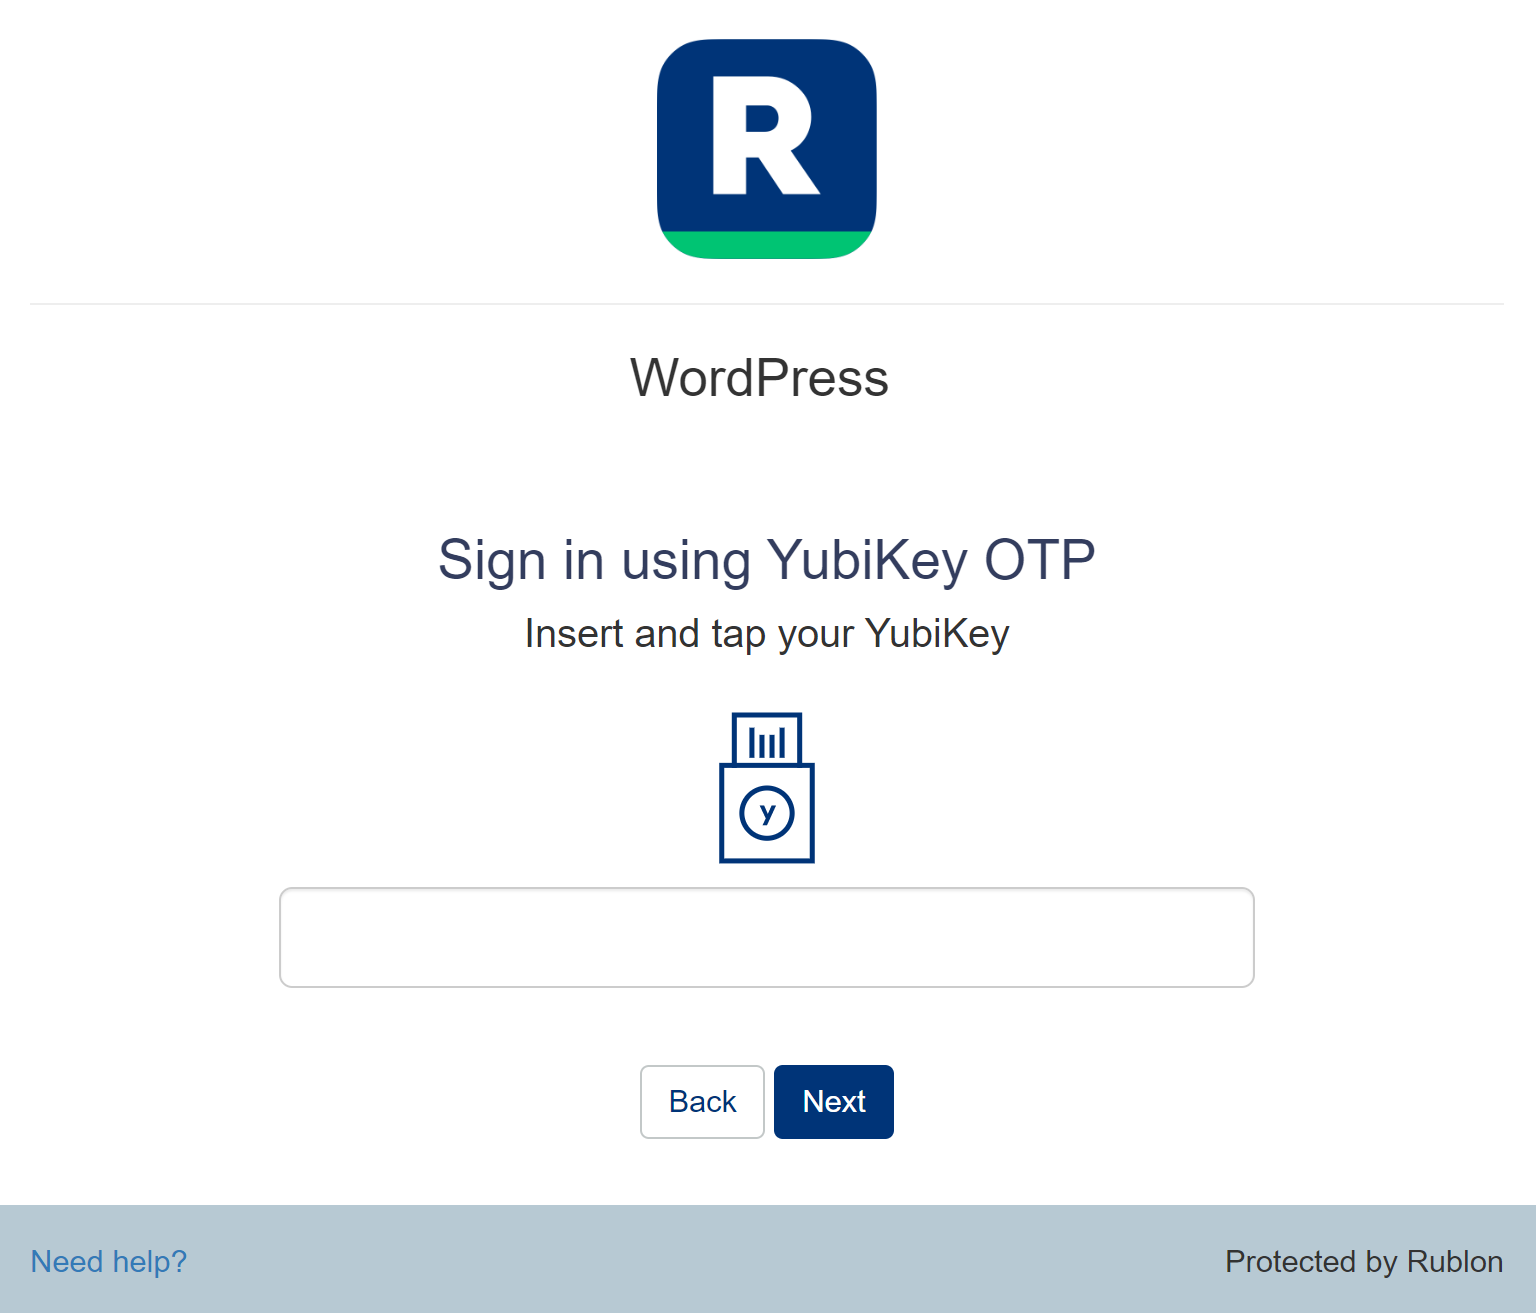 Connect Rublon Multi-Factor Authentication (MFA) with your application in the Rublon Admin Console using the System Token and Secret Key